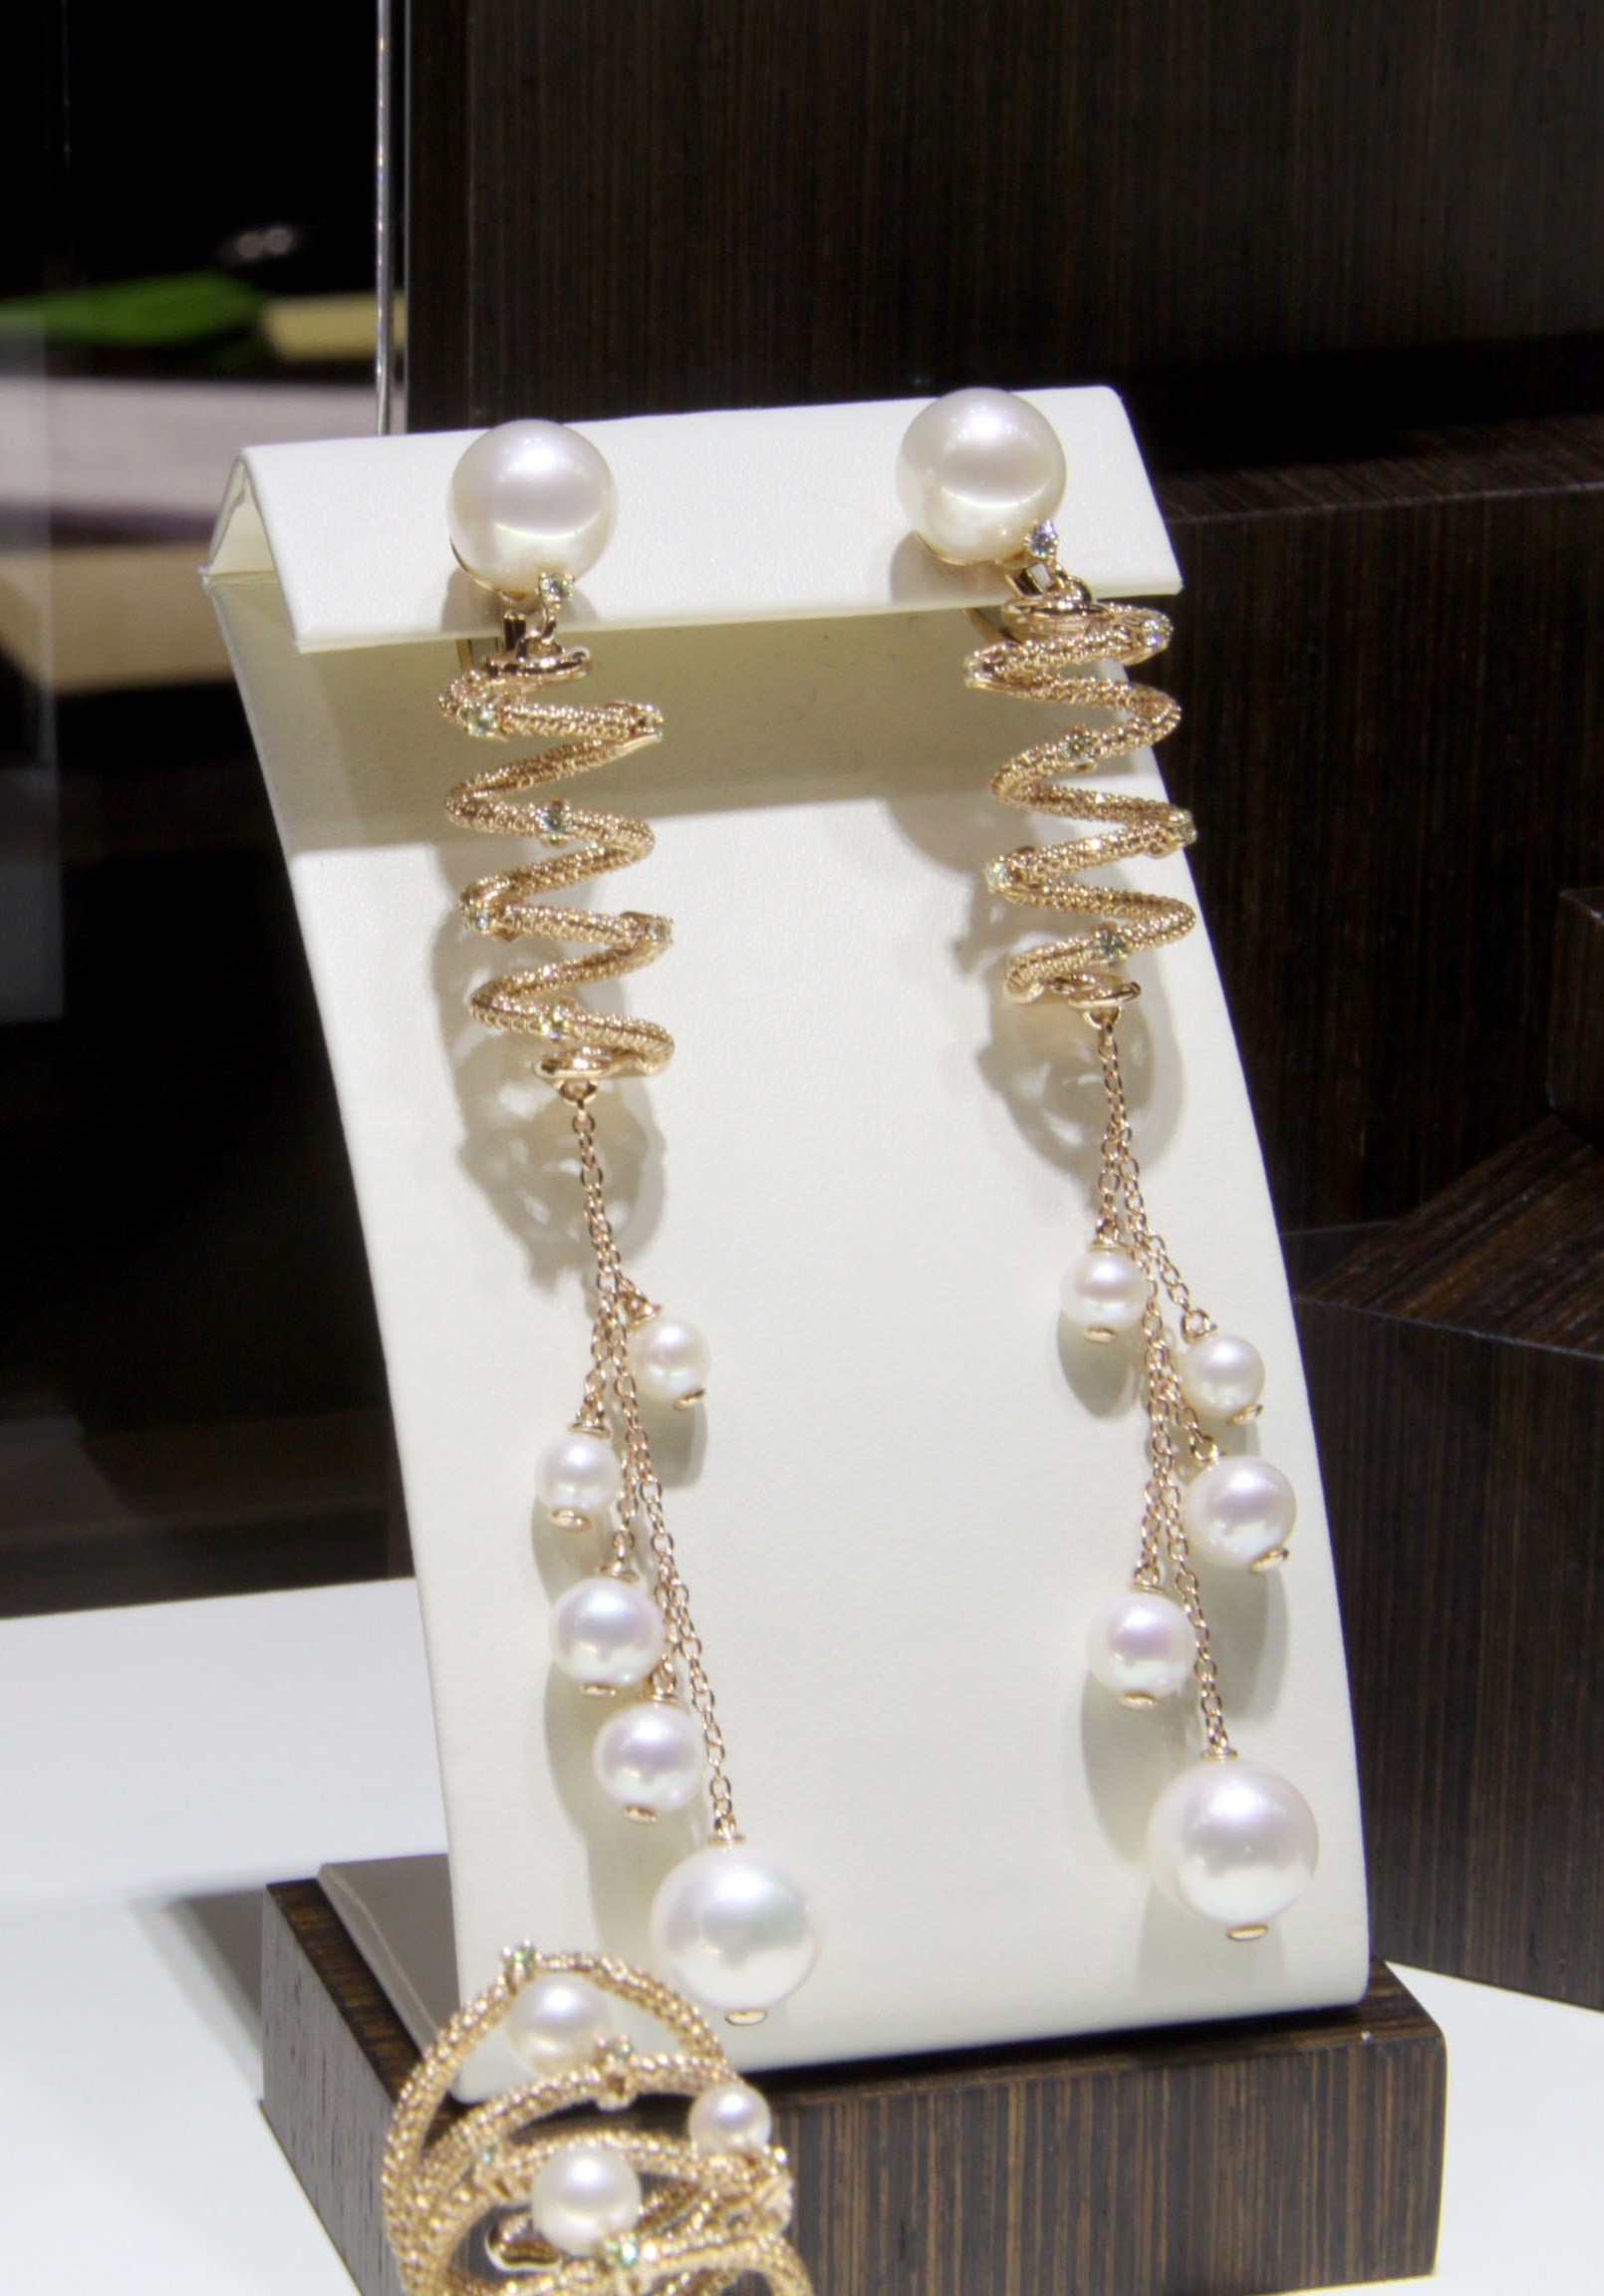 Twist earrings and ring in yellow gold with diamondsand pearls, Giovanni Ferraris